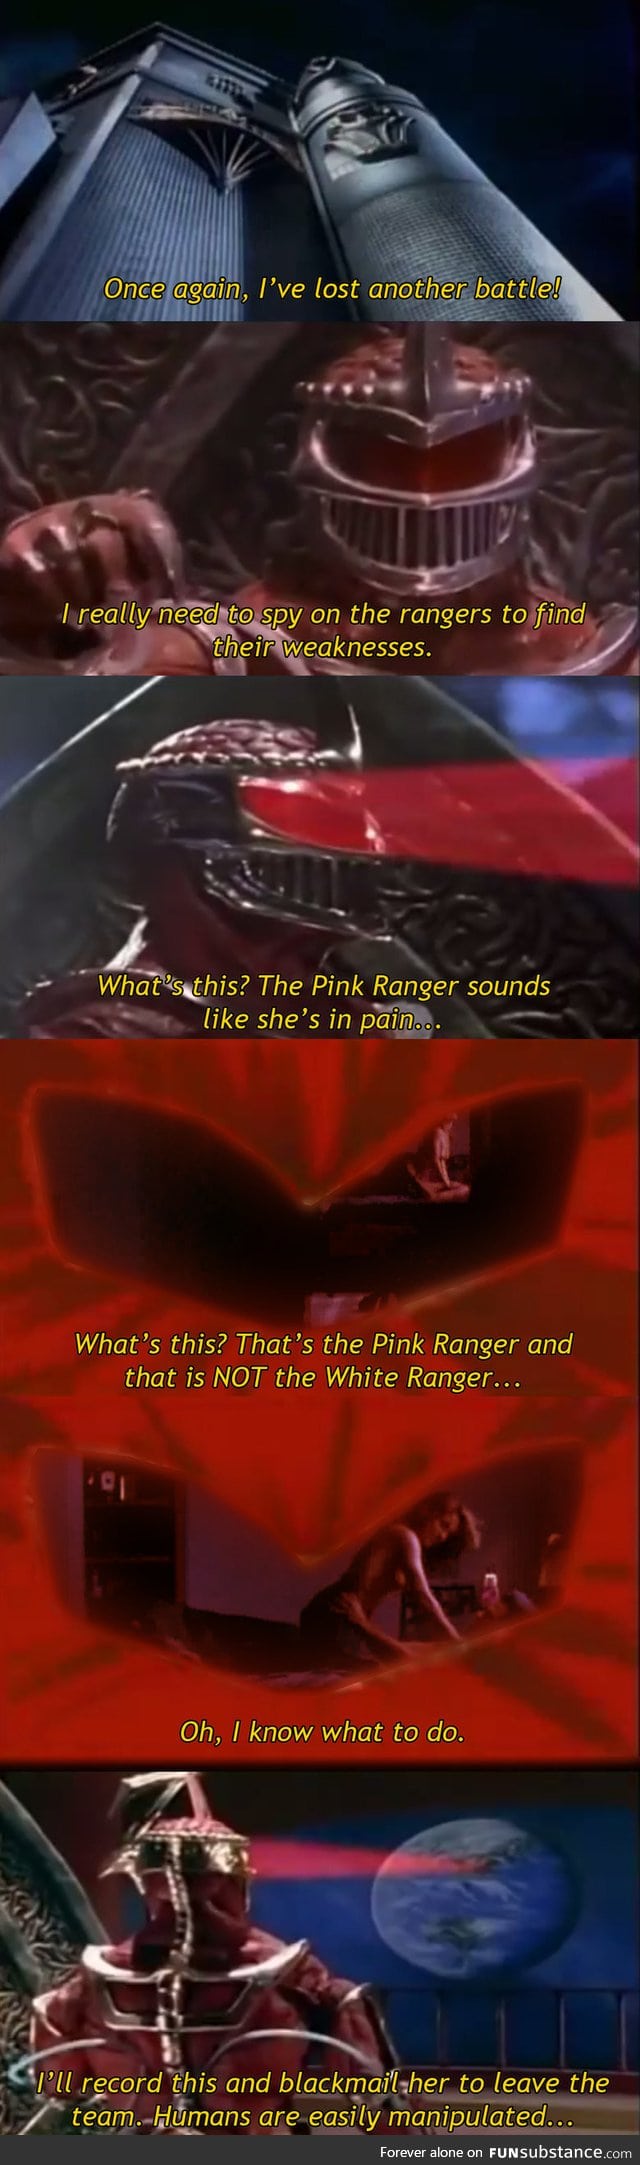 Why the Pink Ranger left the team